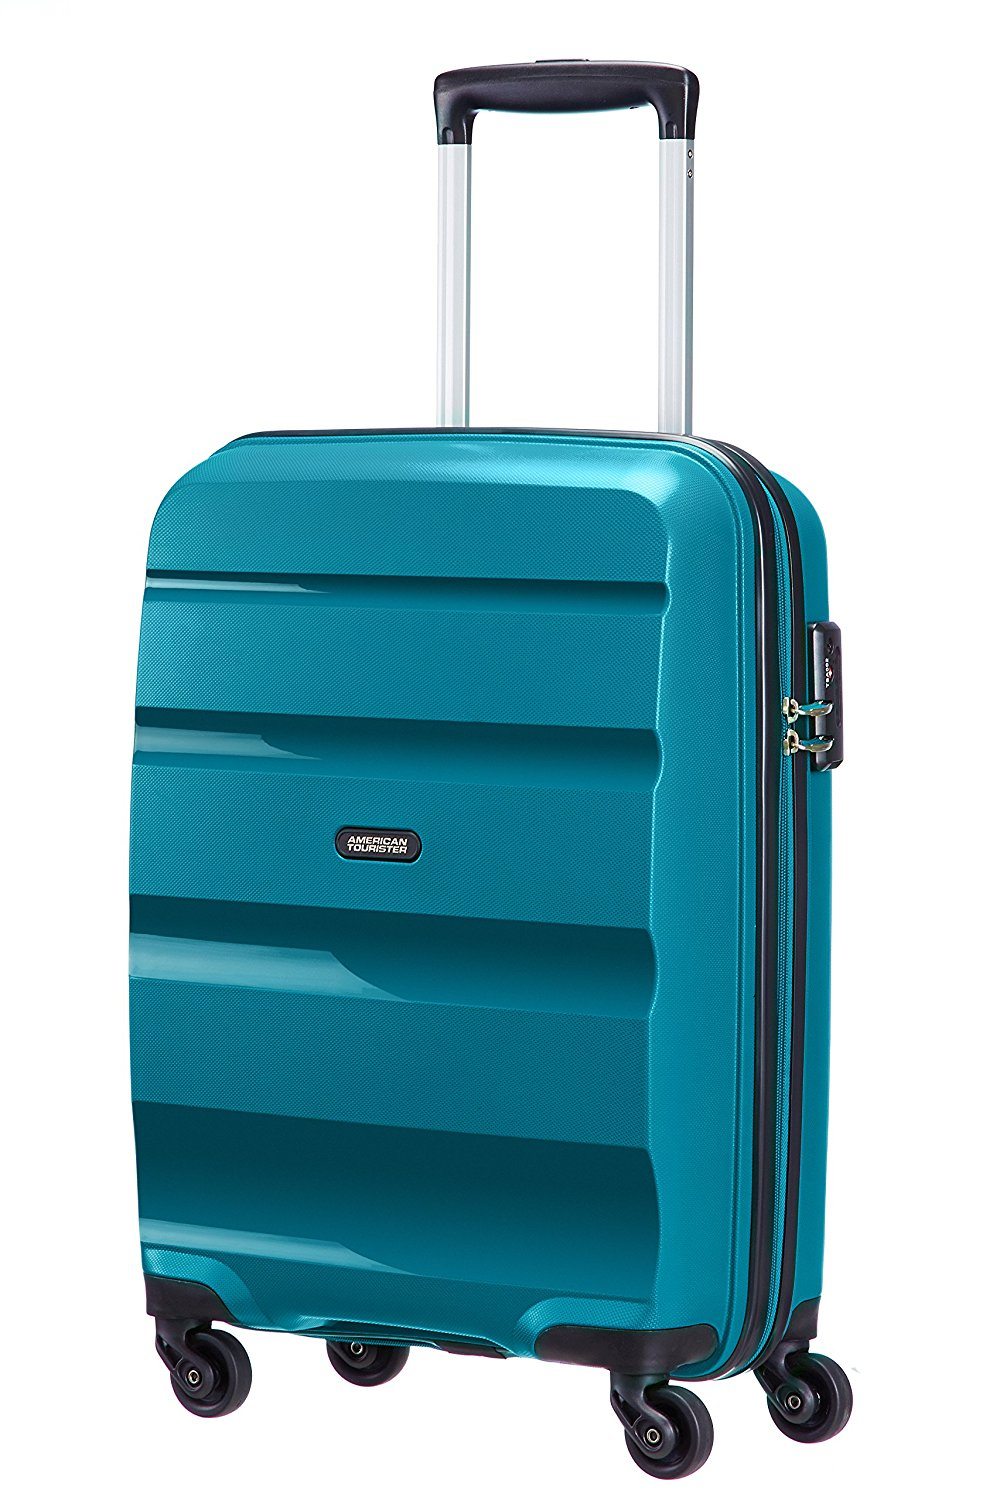 American Tourister Bon Air Spinner Suitcase 